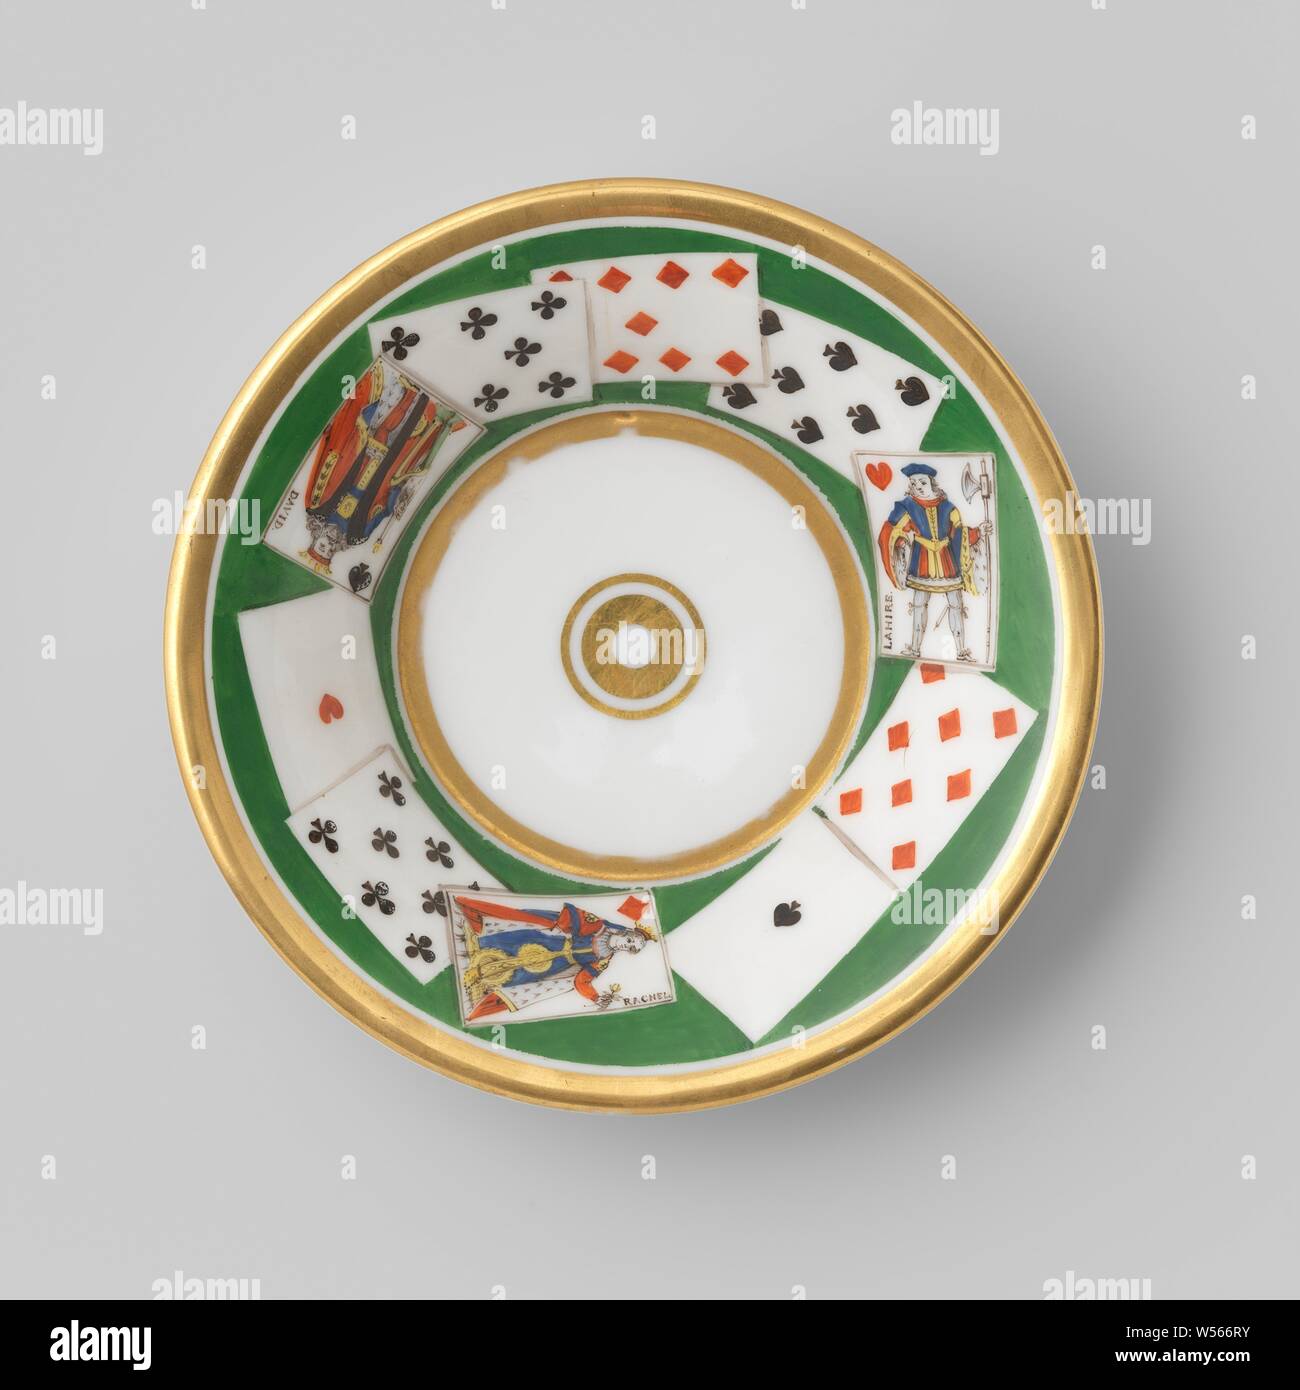 Saucer with playing cards, Porcelain dish on a high foot ring, painted on the enamel in gold and gold. On the flat golden concentric circles. The wall with playing cards against a green background. The high cards are decorated with famous figures with the inscriptions 'RACHEL', 'LAHIRE' and 'DAVID'. Gold border., anonymous, France, c. 1800, porcelain (material), glaze, gold (metal), vitrification, h 3.6 cm d 14.7 cm d 8.5 cm Stock Photo